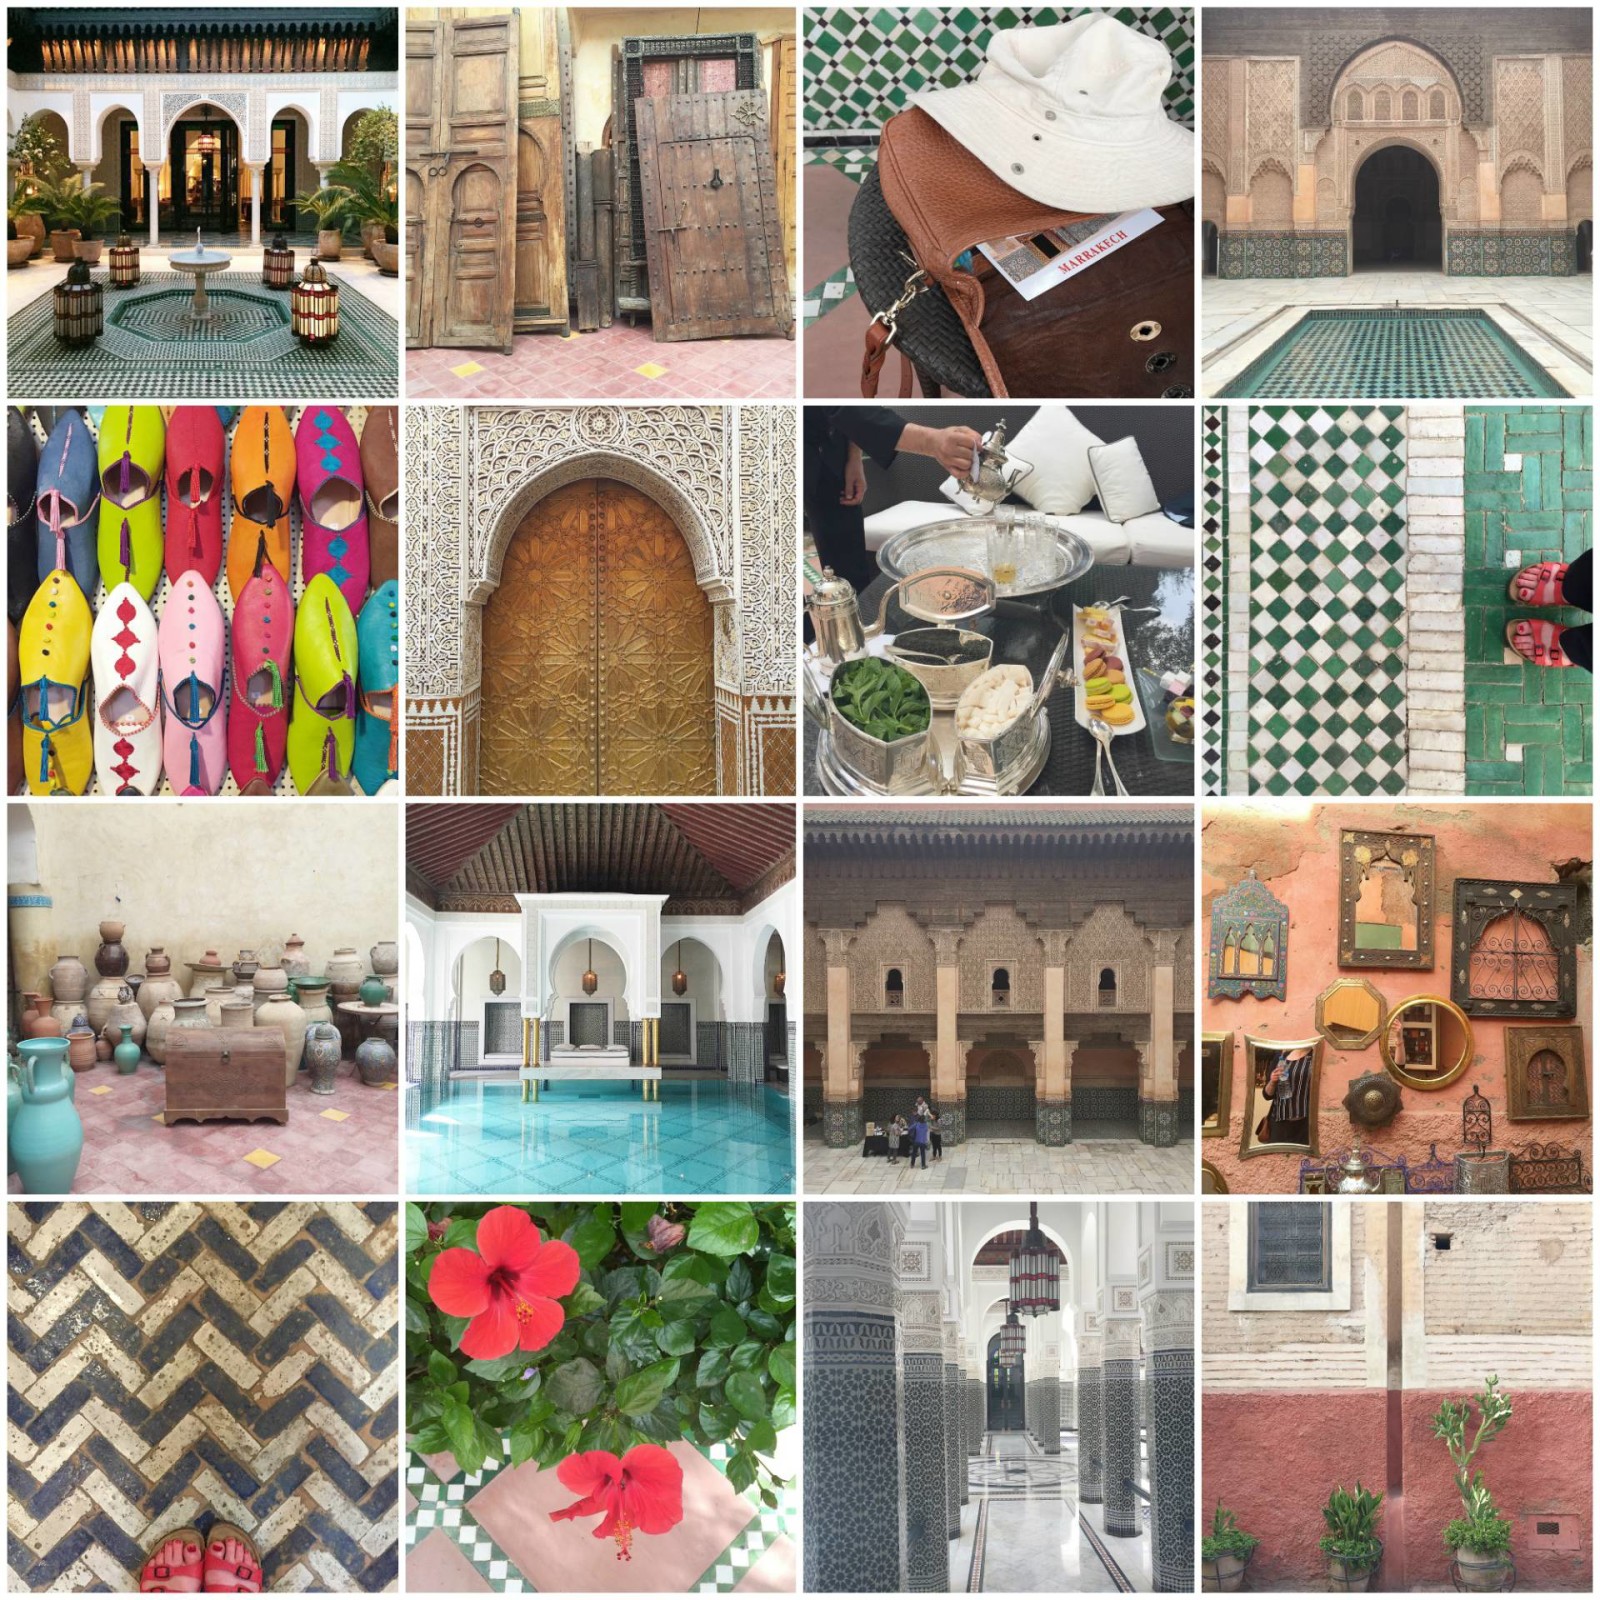 Where-Did-the-Wind-Blow-Me-and-a-few-other-reflections-My-2015-Review-Marrakech